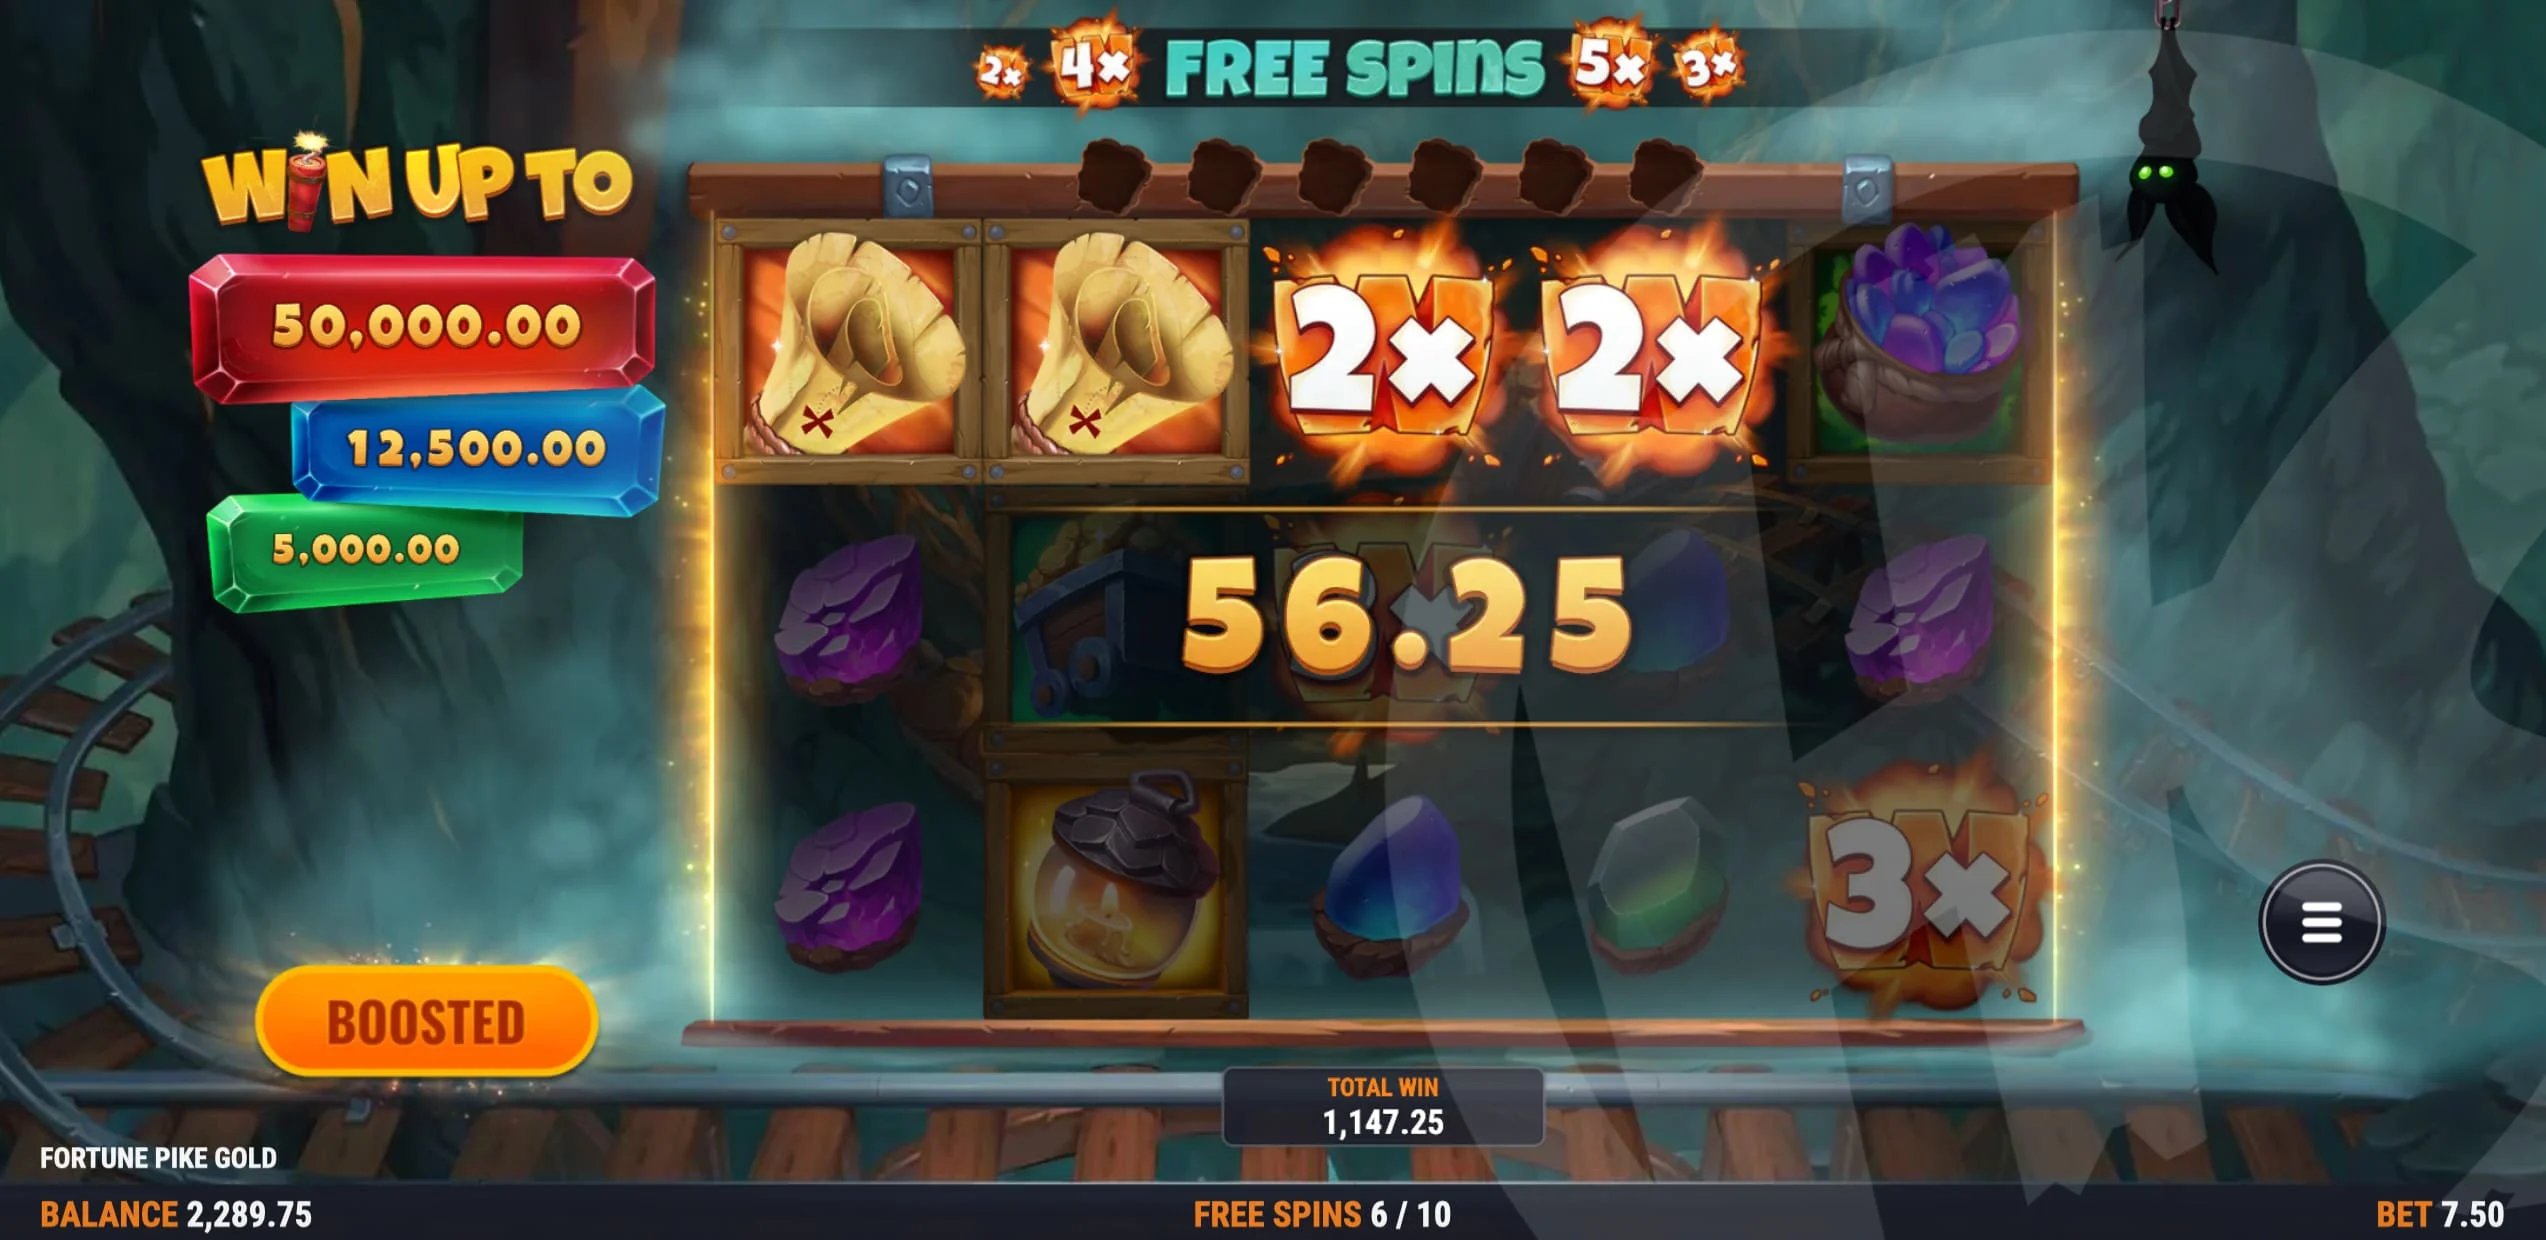 During Free Spins Lucky Dinky Random Wilds Contain Multipliers Between 2x-5x